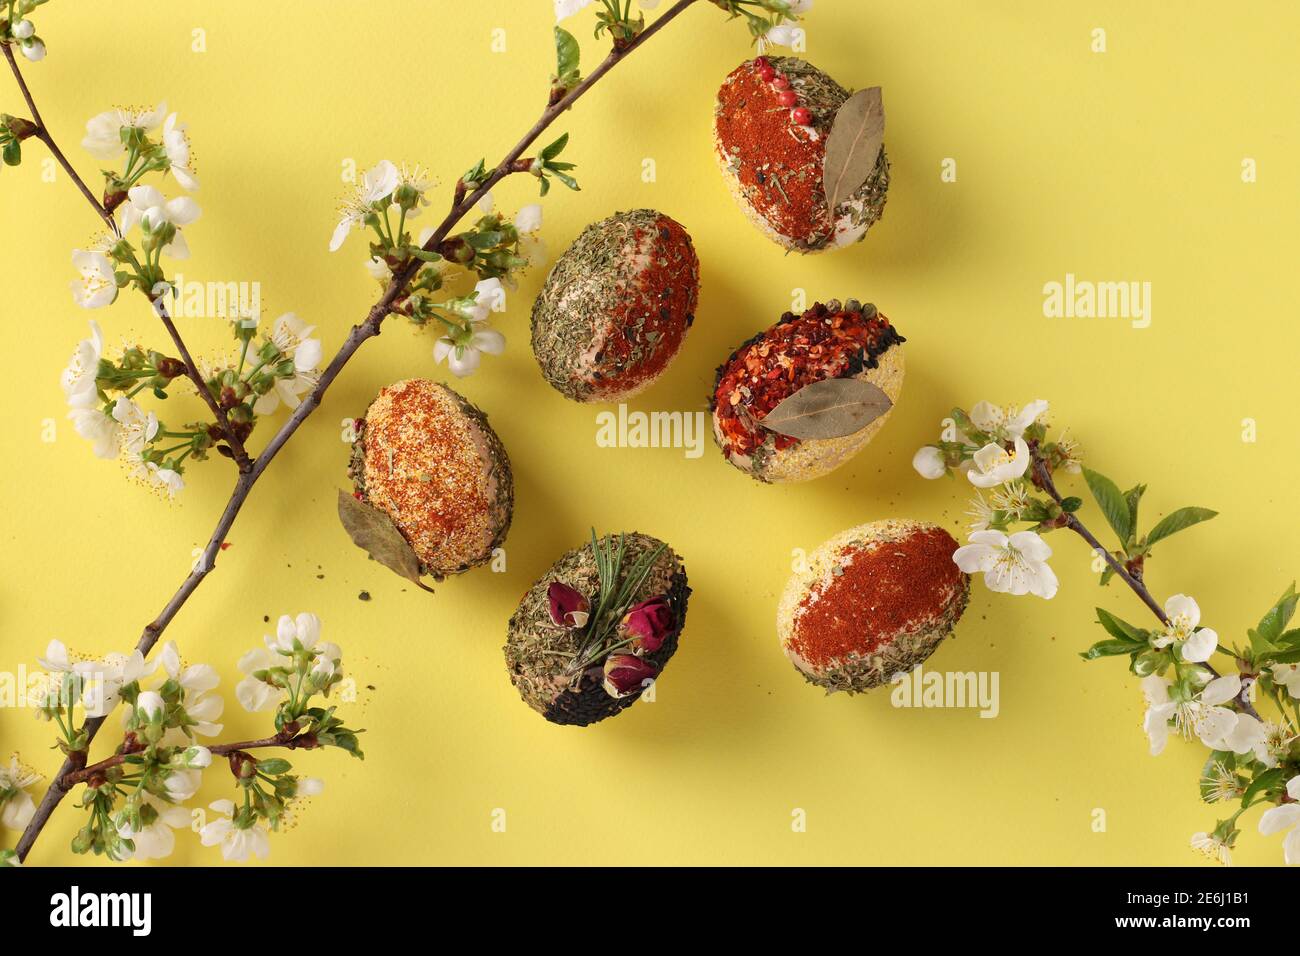 Easter concept with eggs decorated with different spices and cereals without dyes and preservatives on yellow background. View from above Stock Photo